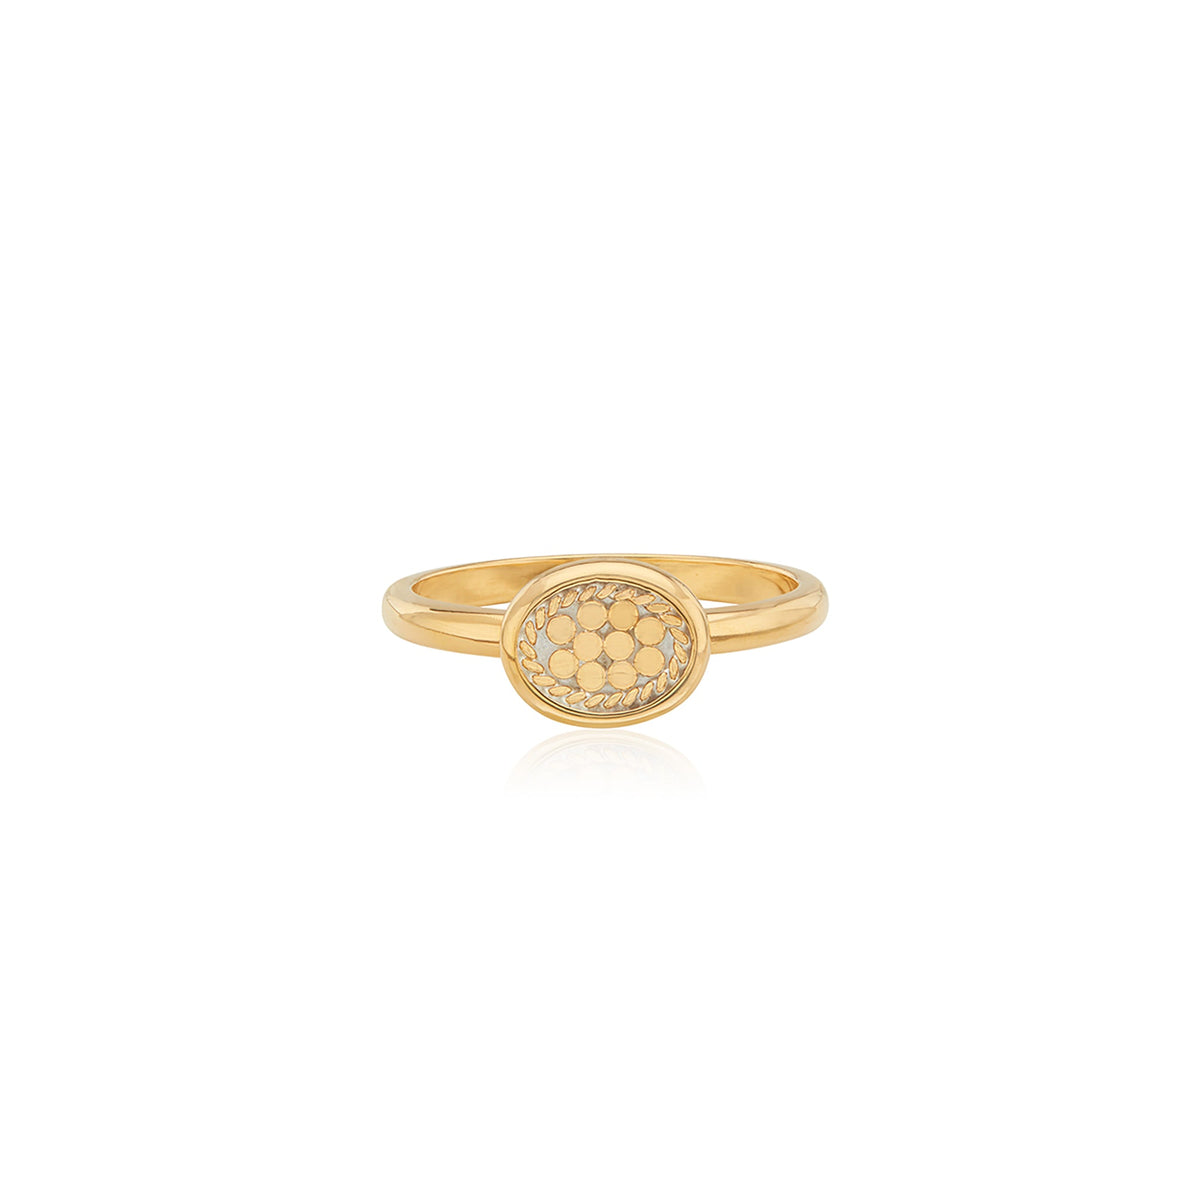 Gold smooth rim ring with an oval topper